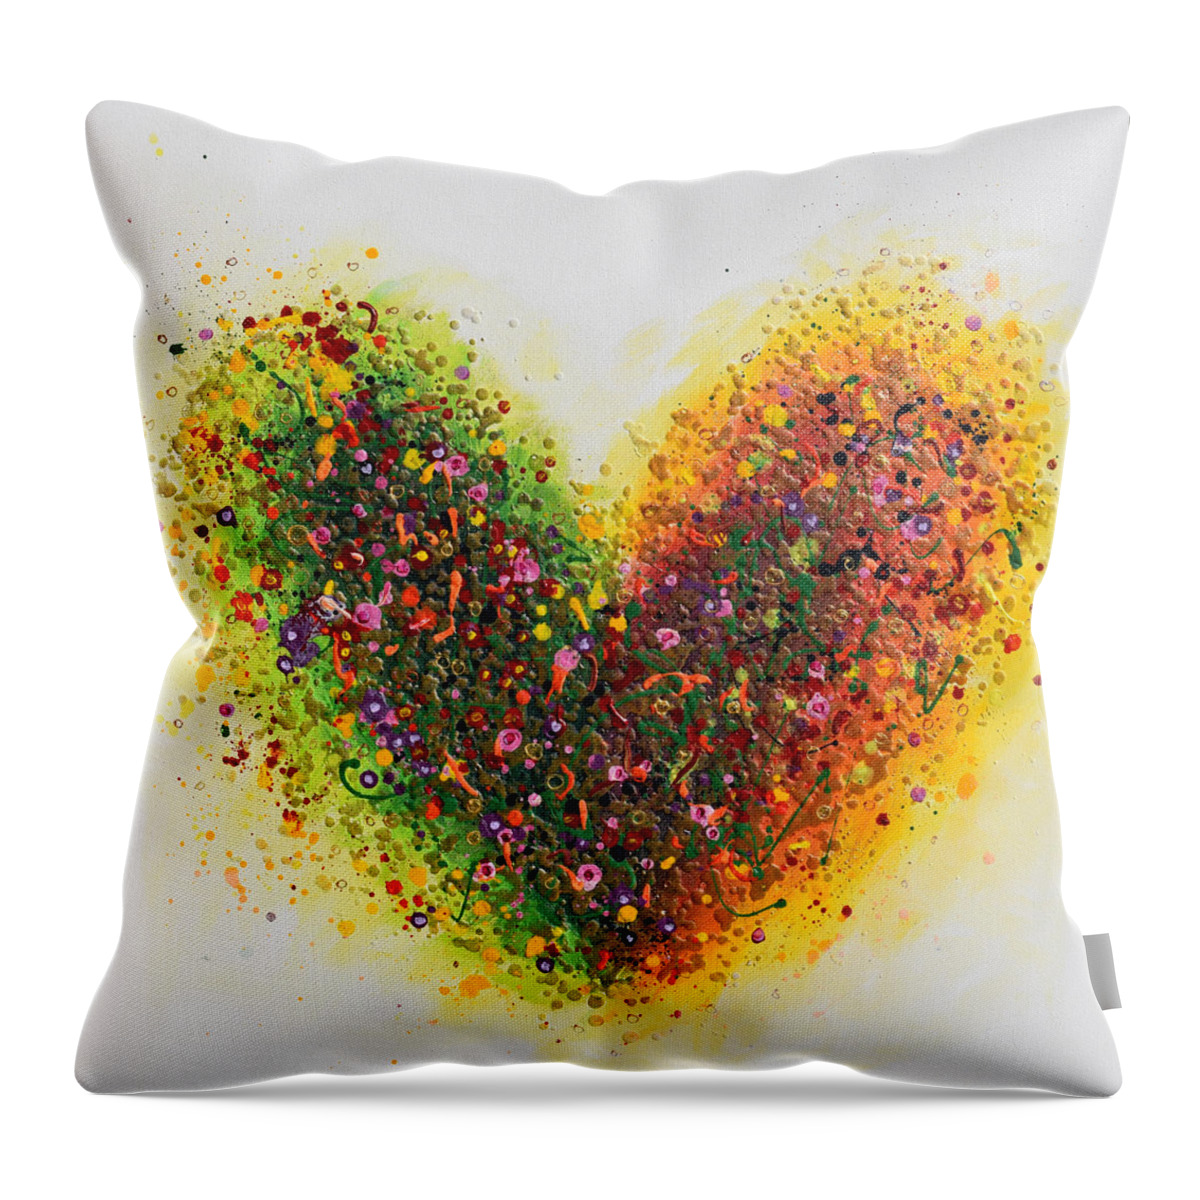 Heart Throw Pillow featuring the painting Summer Love by Amanda Dagg